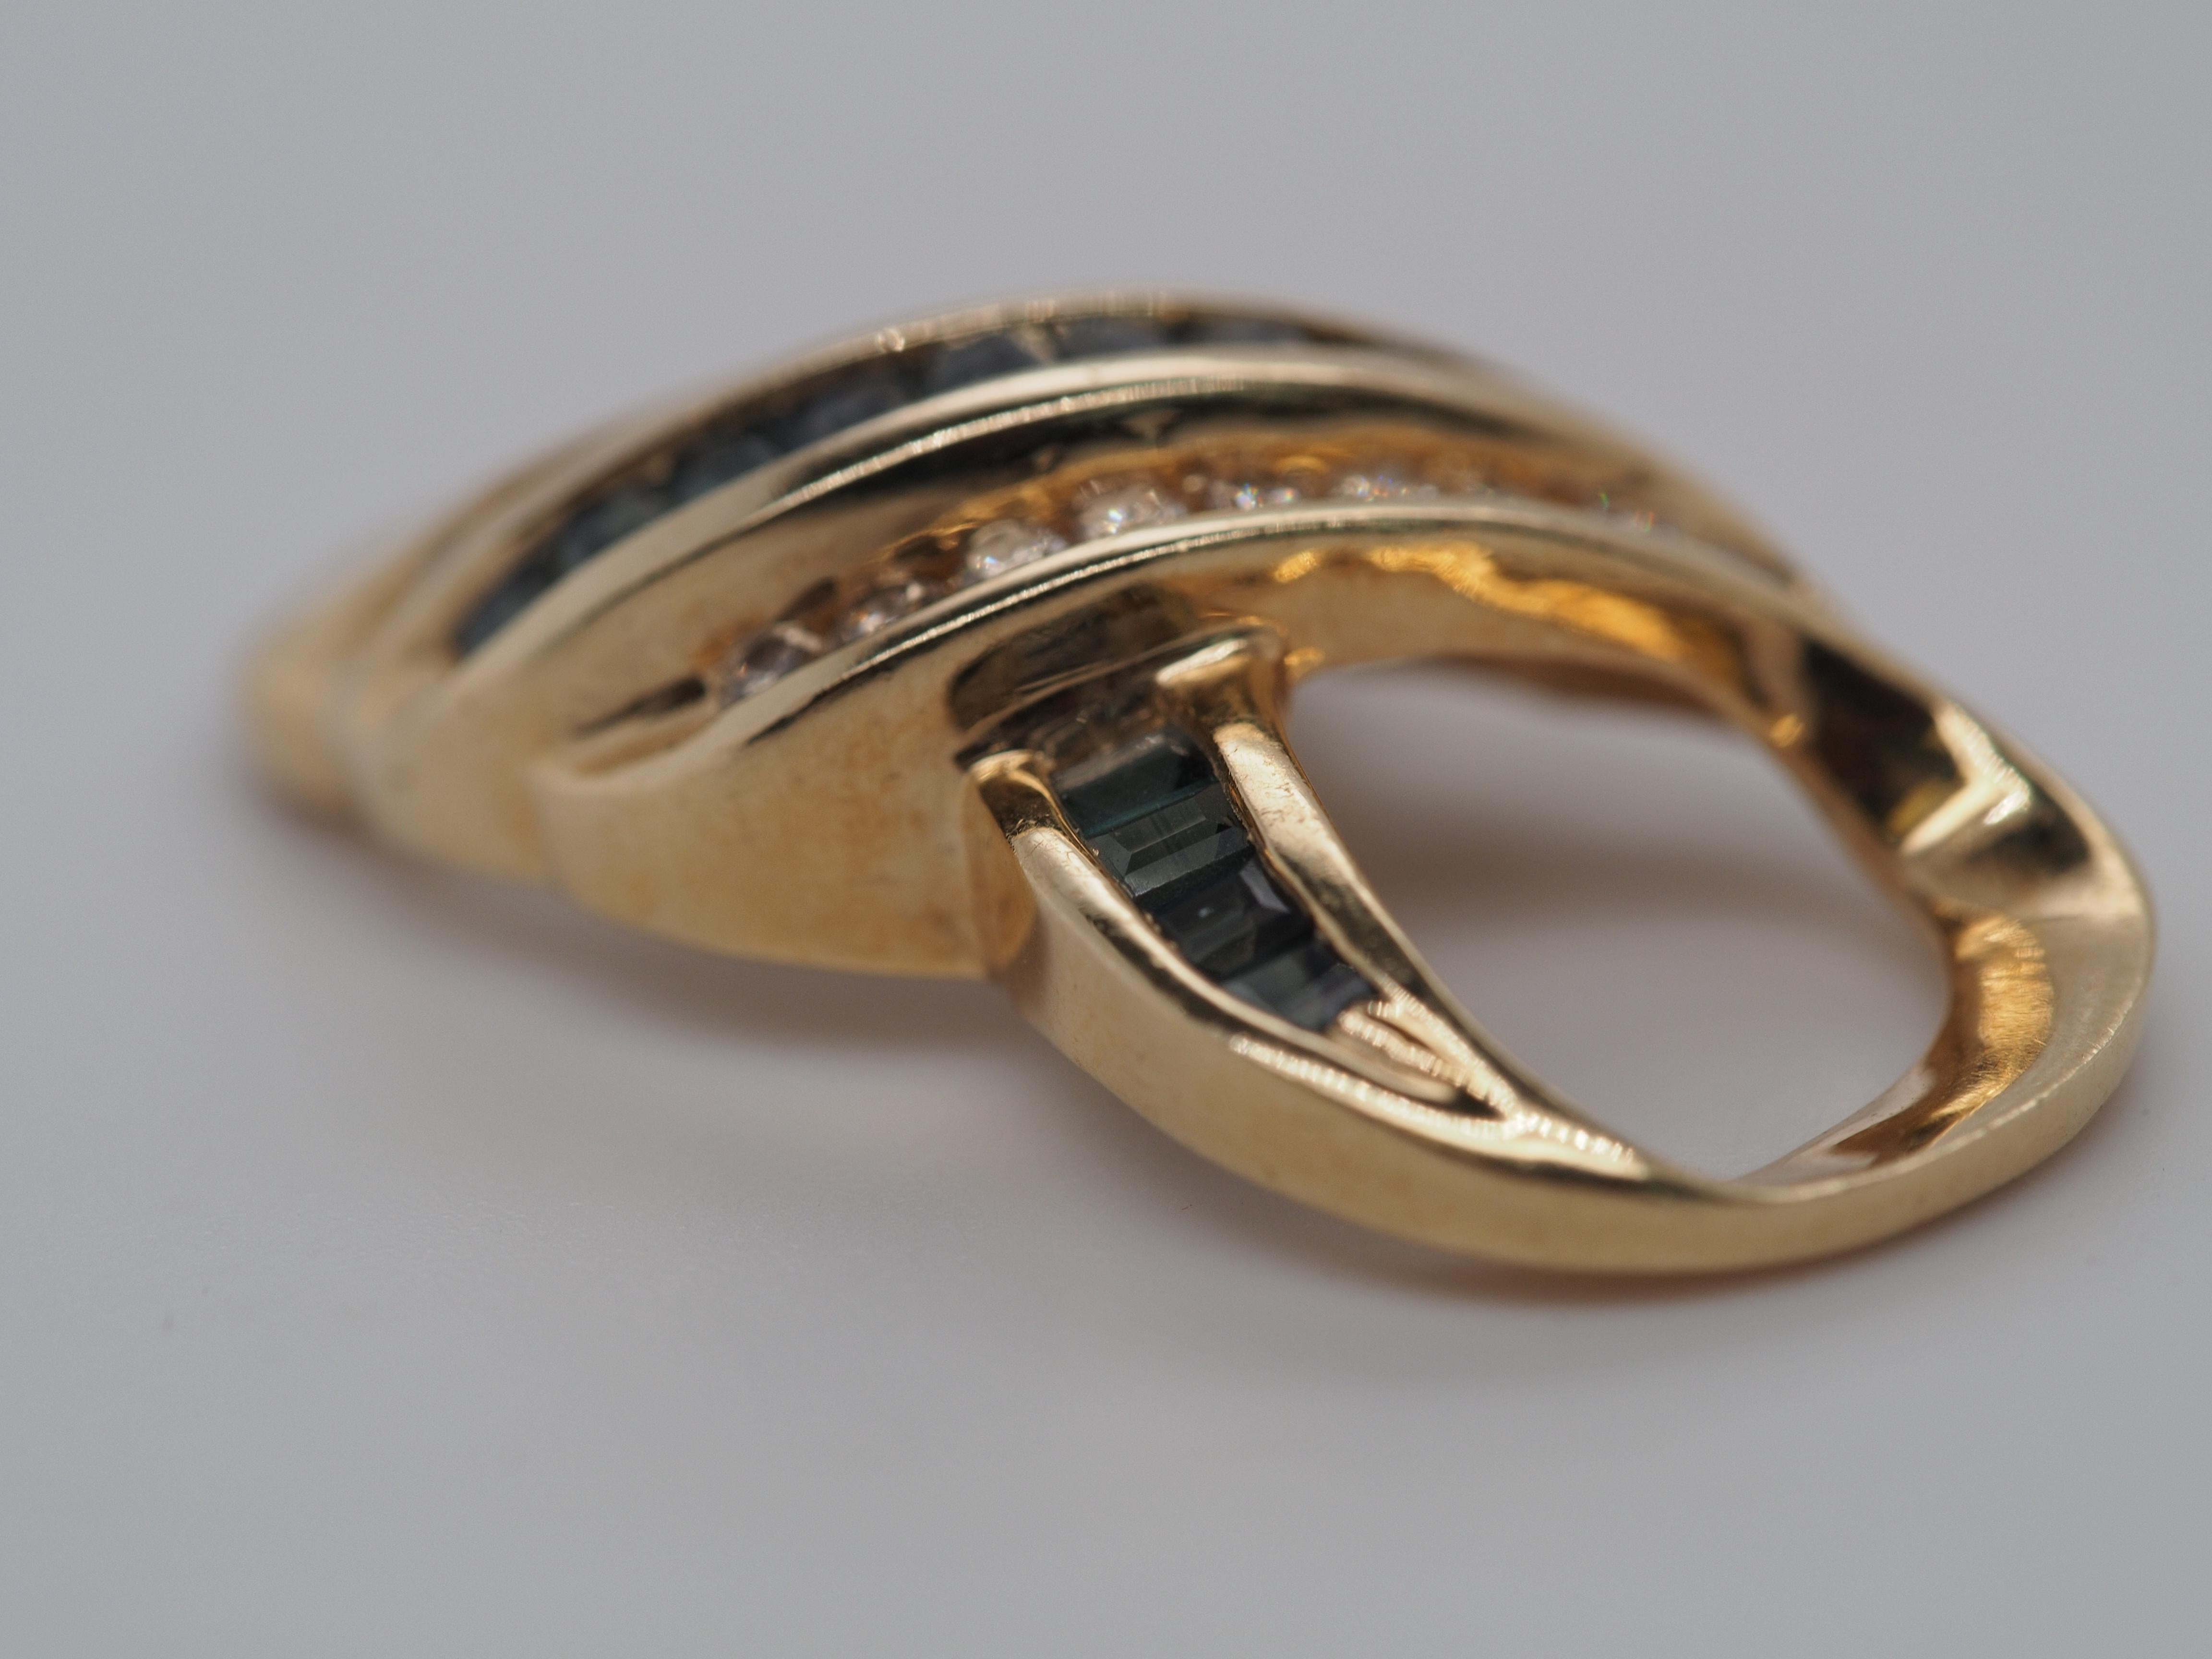 Item Details:
Metal Type: 14K Yellow Gold [Hallmarked, and Tested]
Weight: 4.5 grams
Condition: Excellent